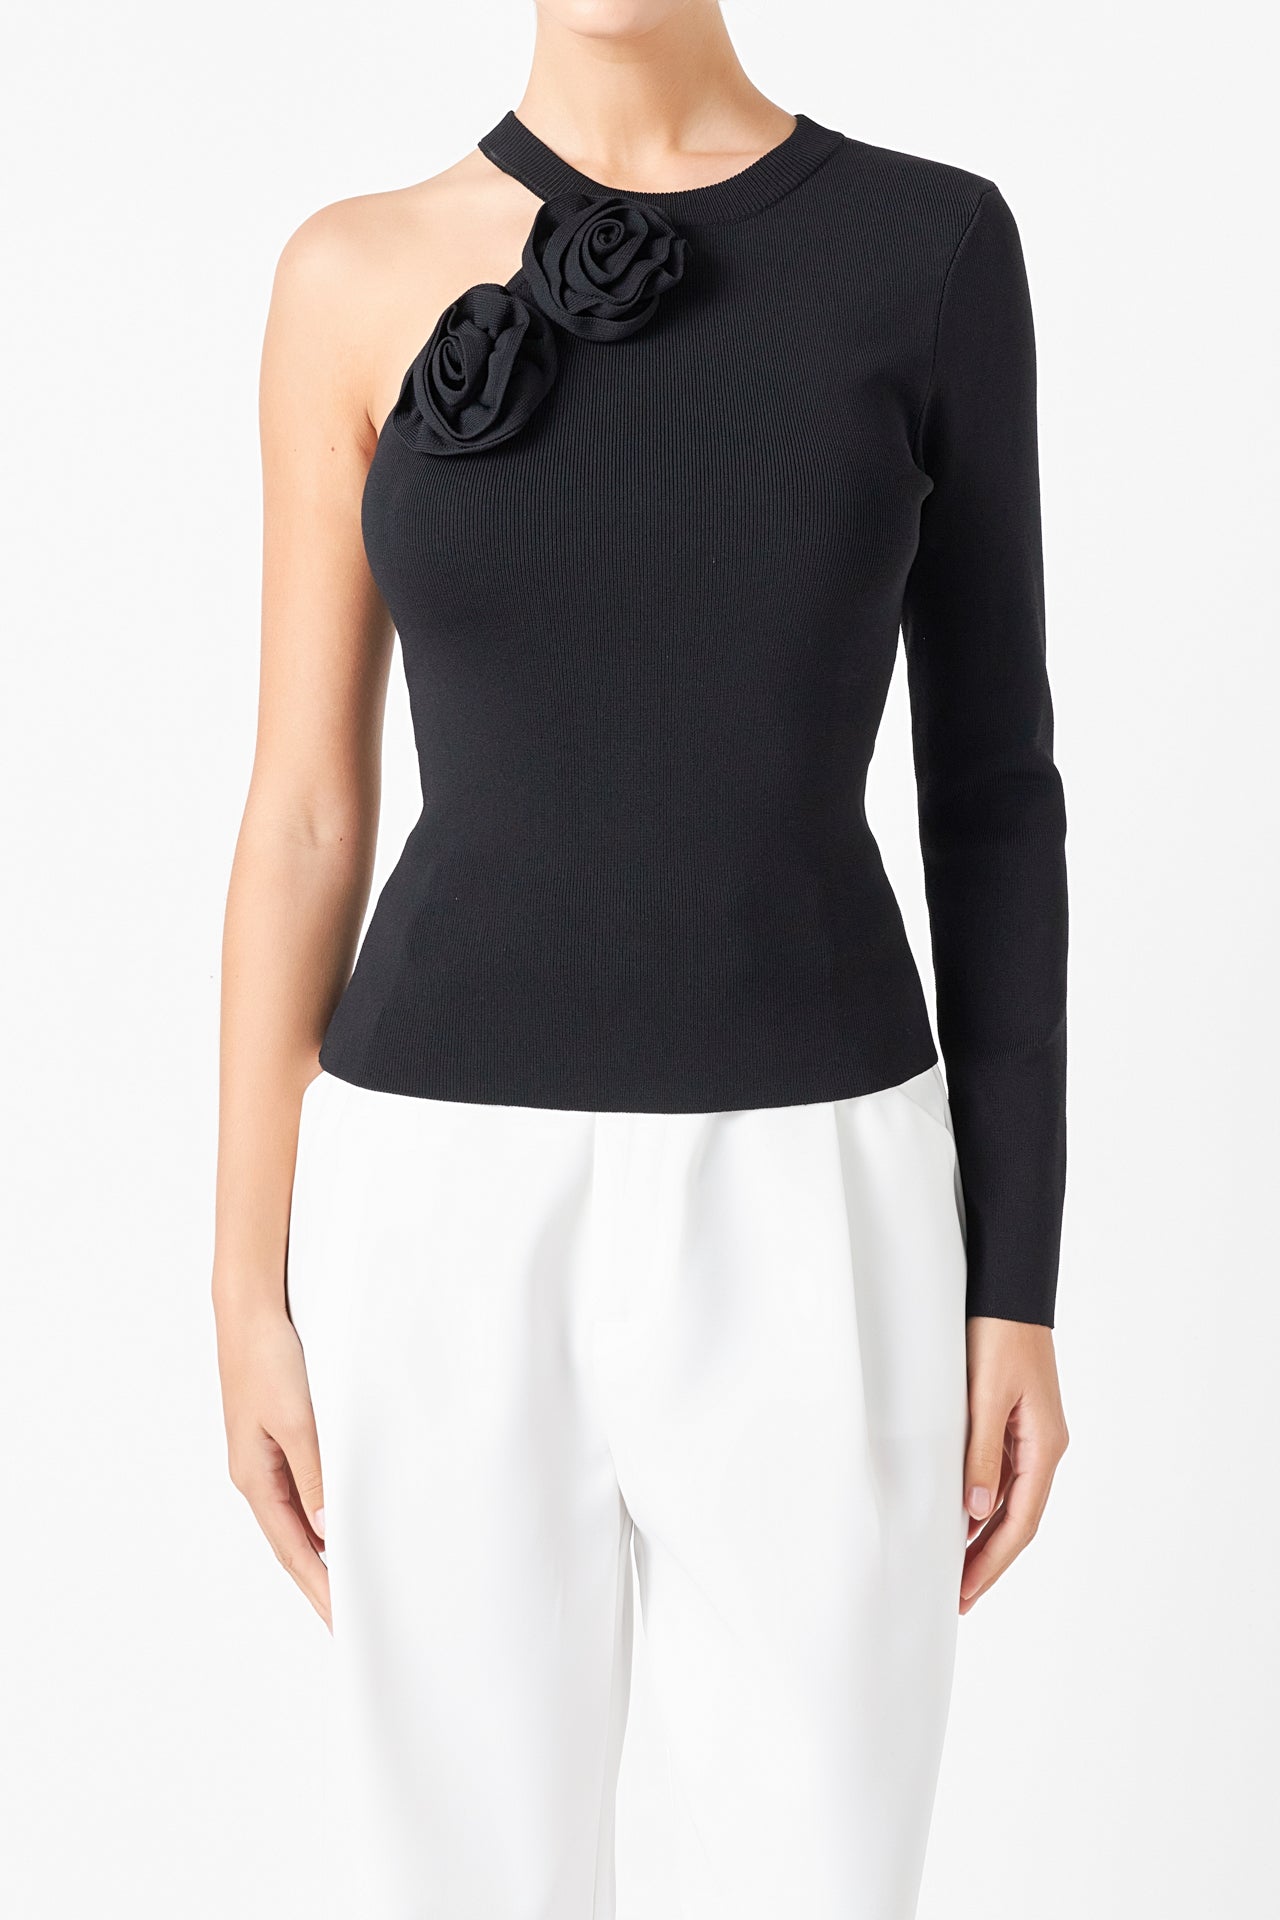 ENDLESS ROSE - Rose Knit Top - TOPS available at Objectrare